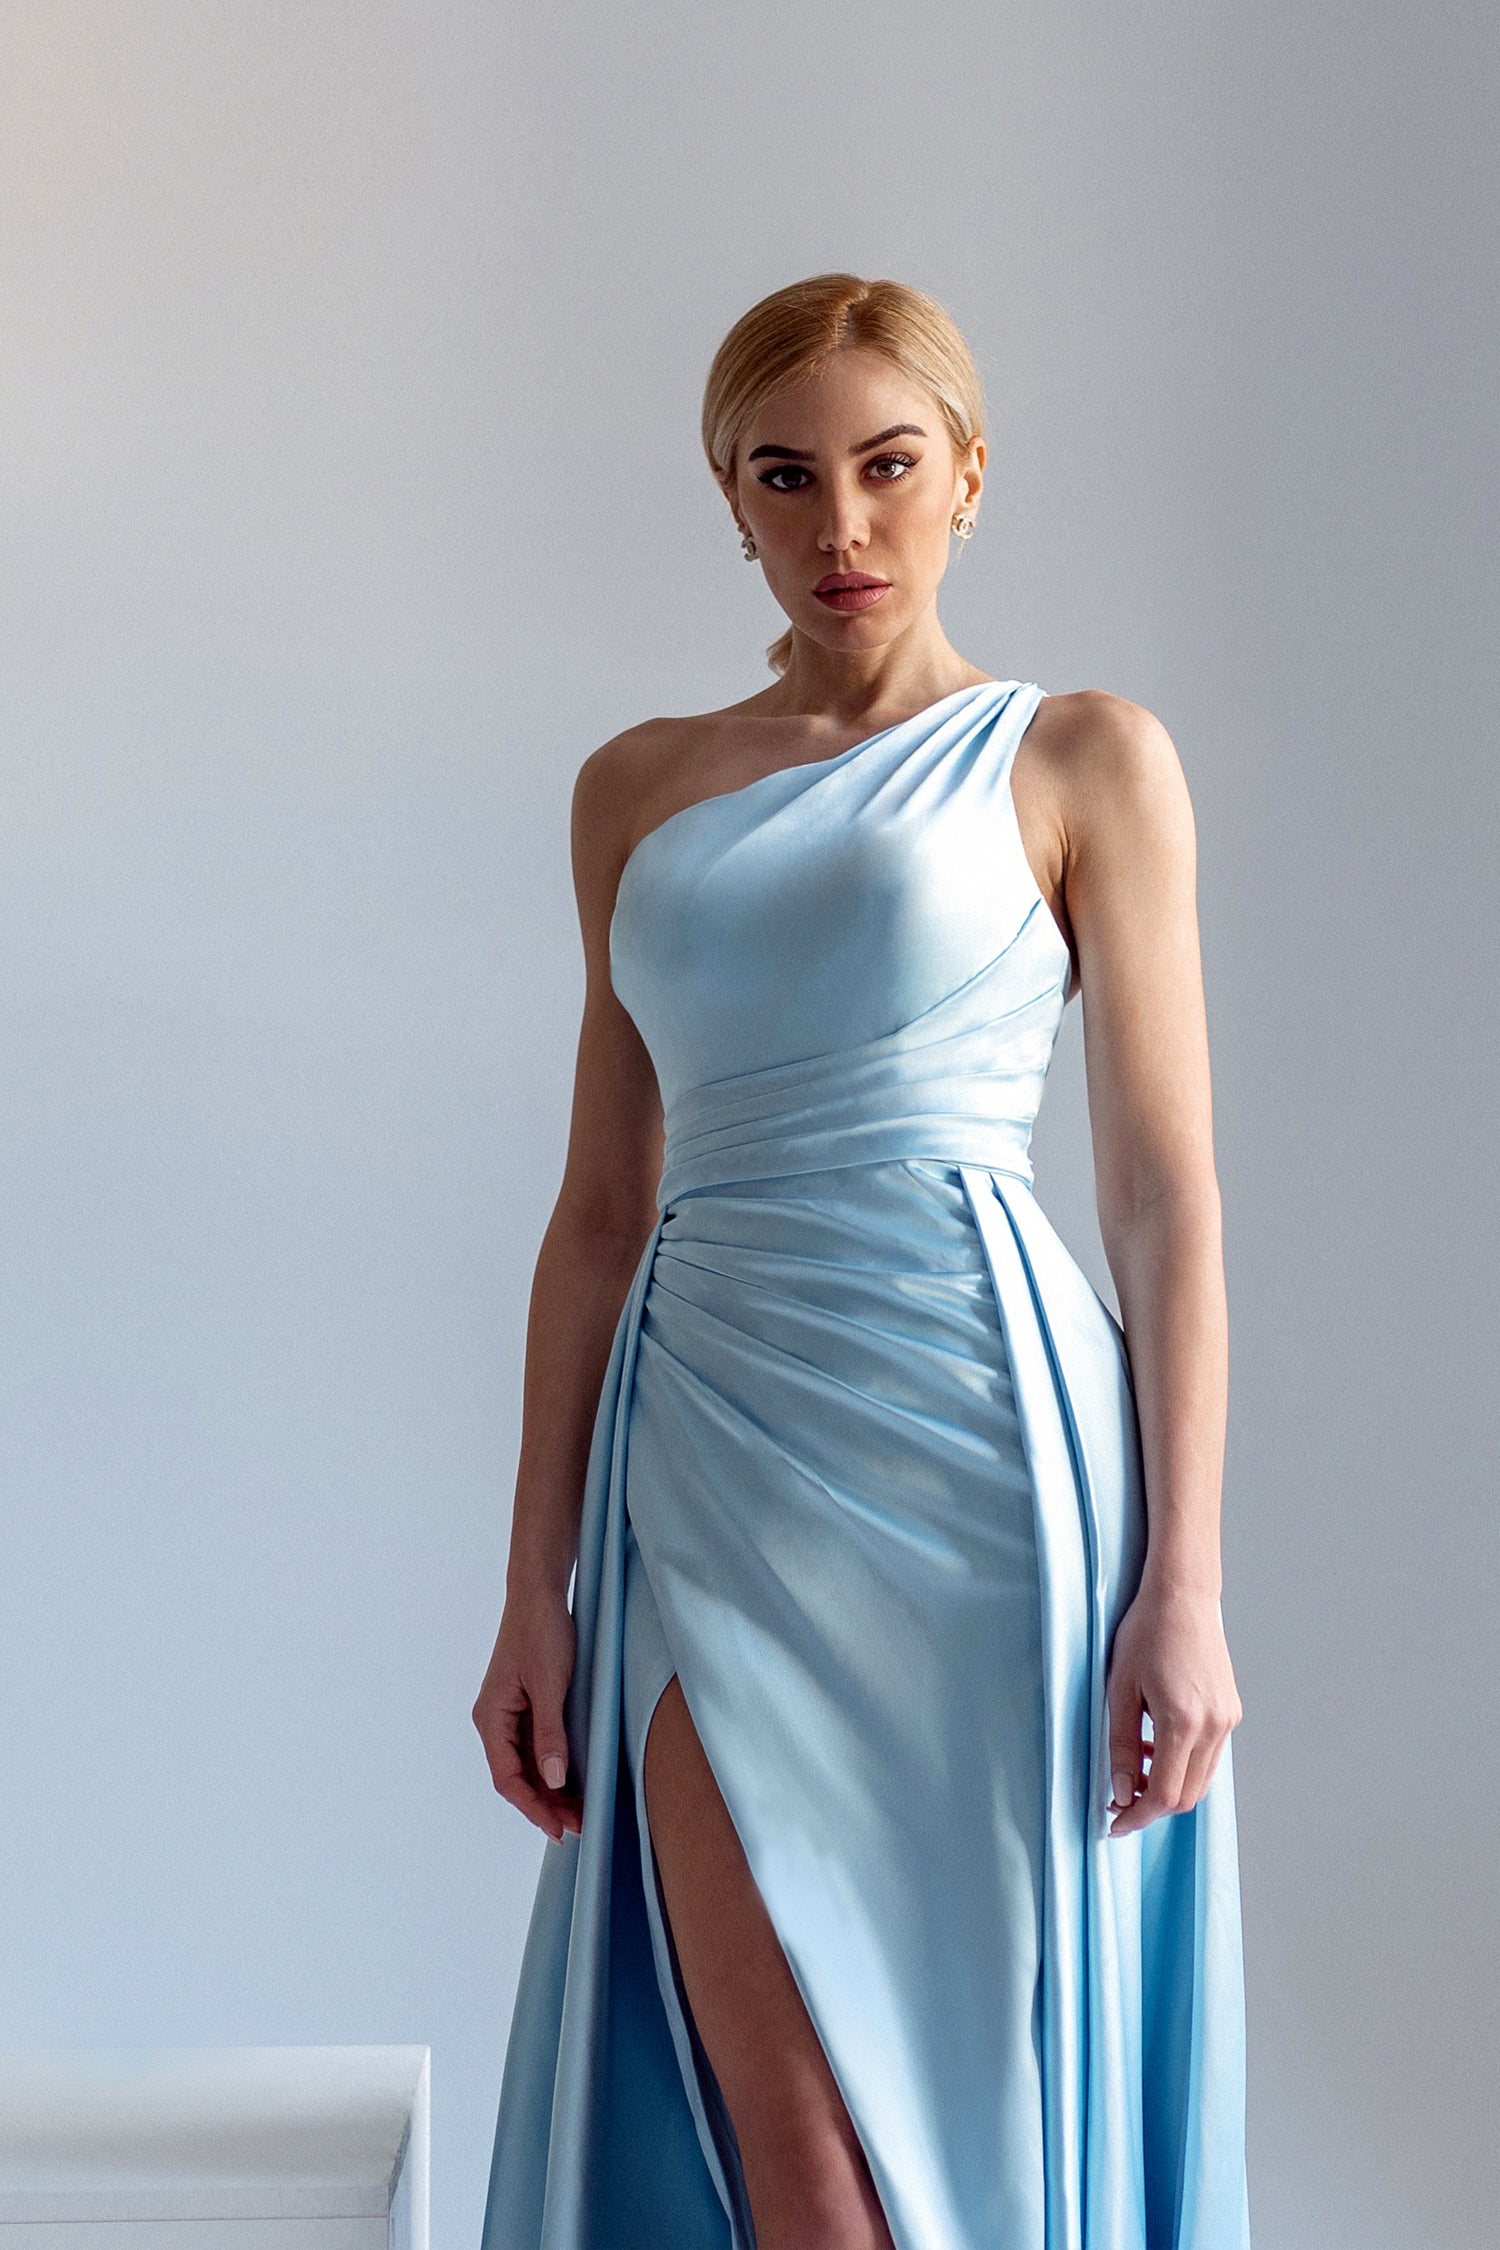 Tina Holly Couture TK888 Ice Blue Silk Satin Asymmetrical Neck Line With A Ruched Side And High Leg Spilt Formal Dress